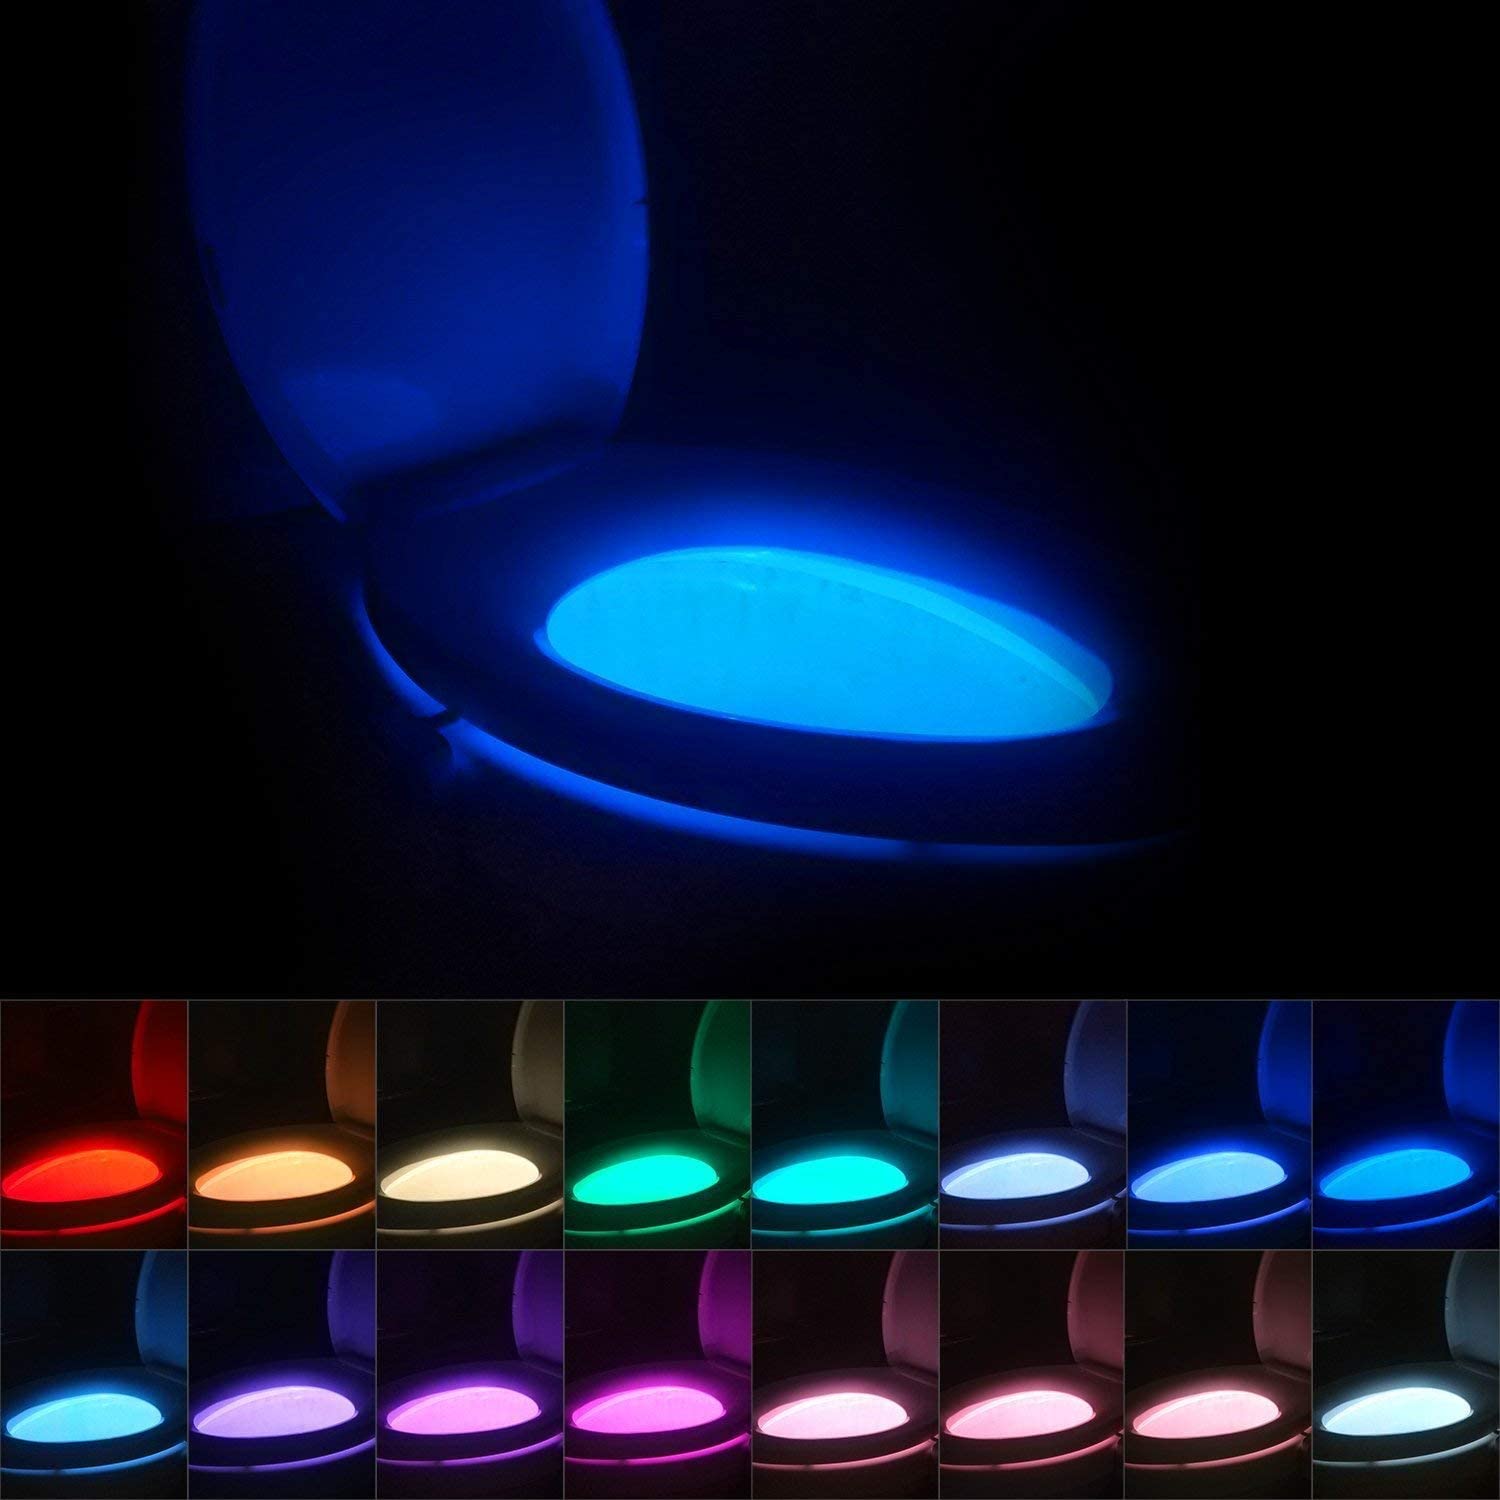 Unique /& Funny Birthday Gifts for Dad Kids Men Cool Fun Bathroom Accessary 2 Pack Toilet Night Lights,16-Color Motion Activated Detection Bowl Light Best Gag Gadgets for Christmas Stocking Stuffers